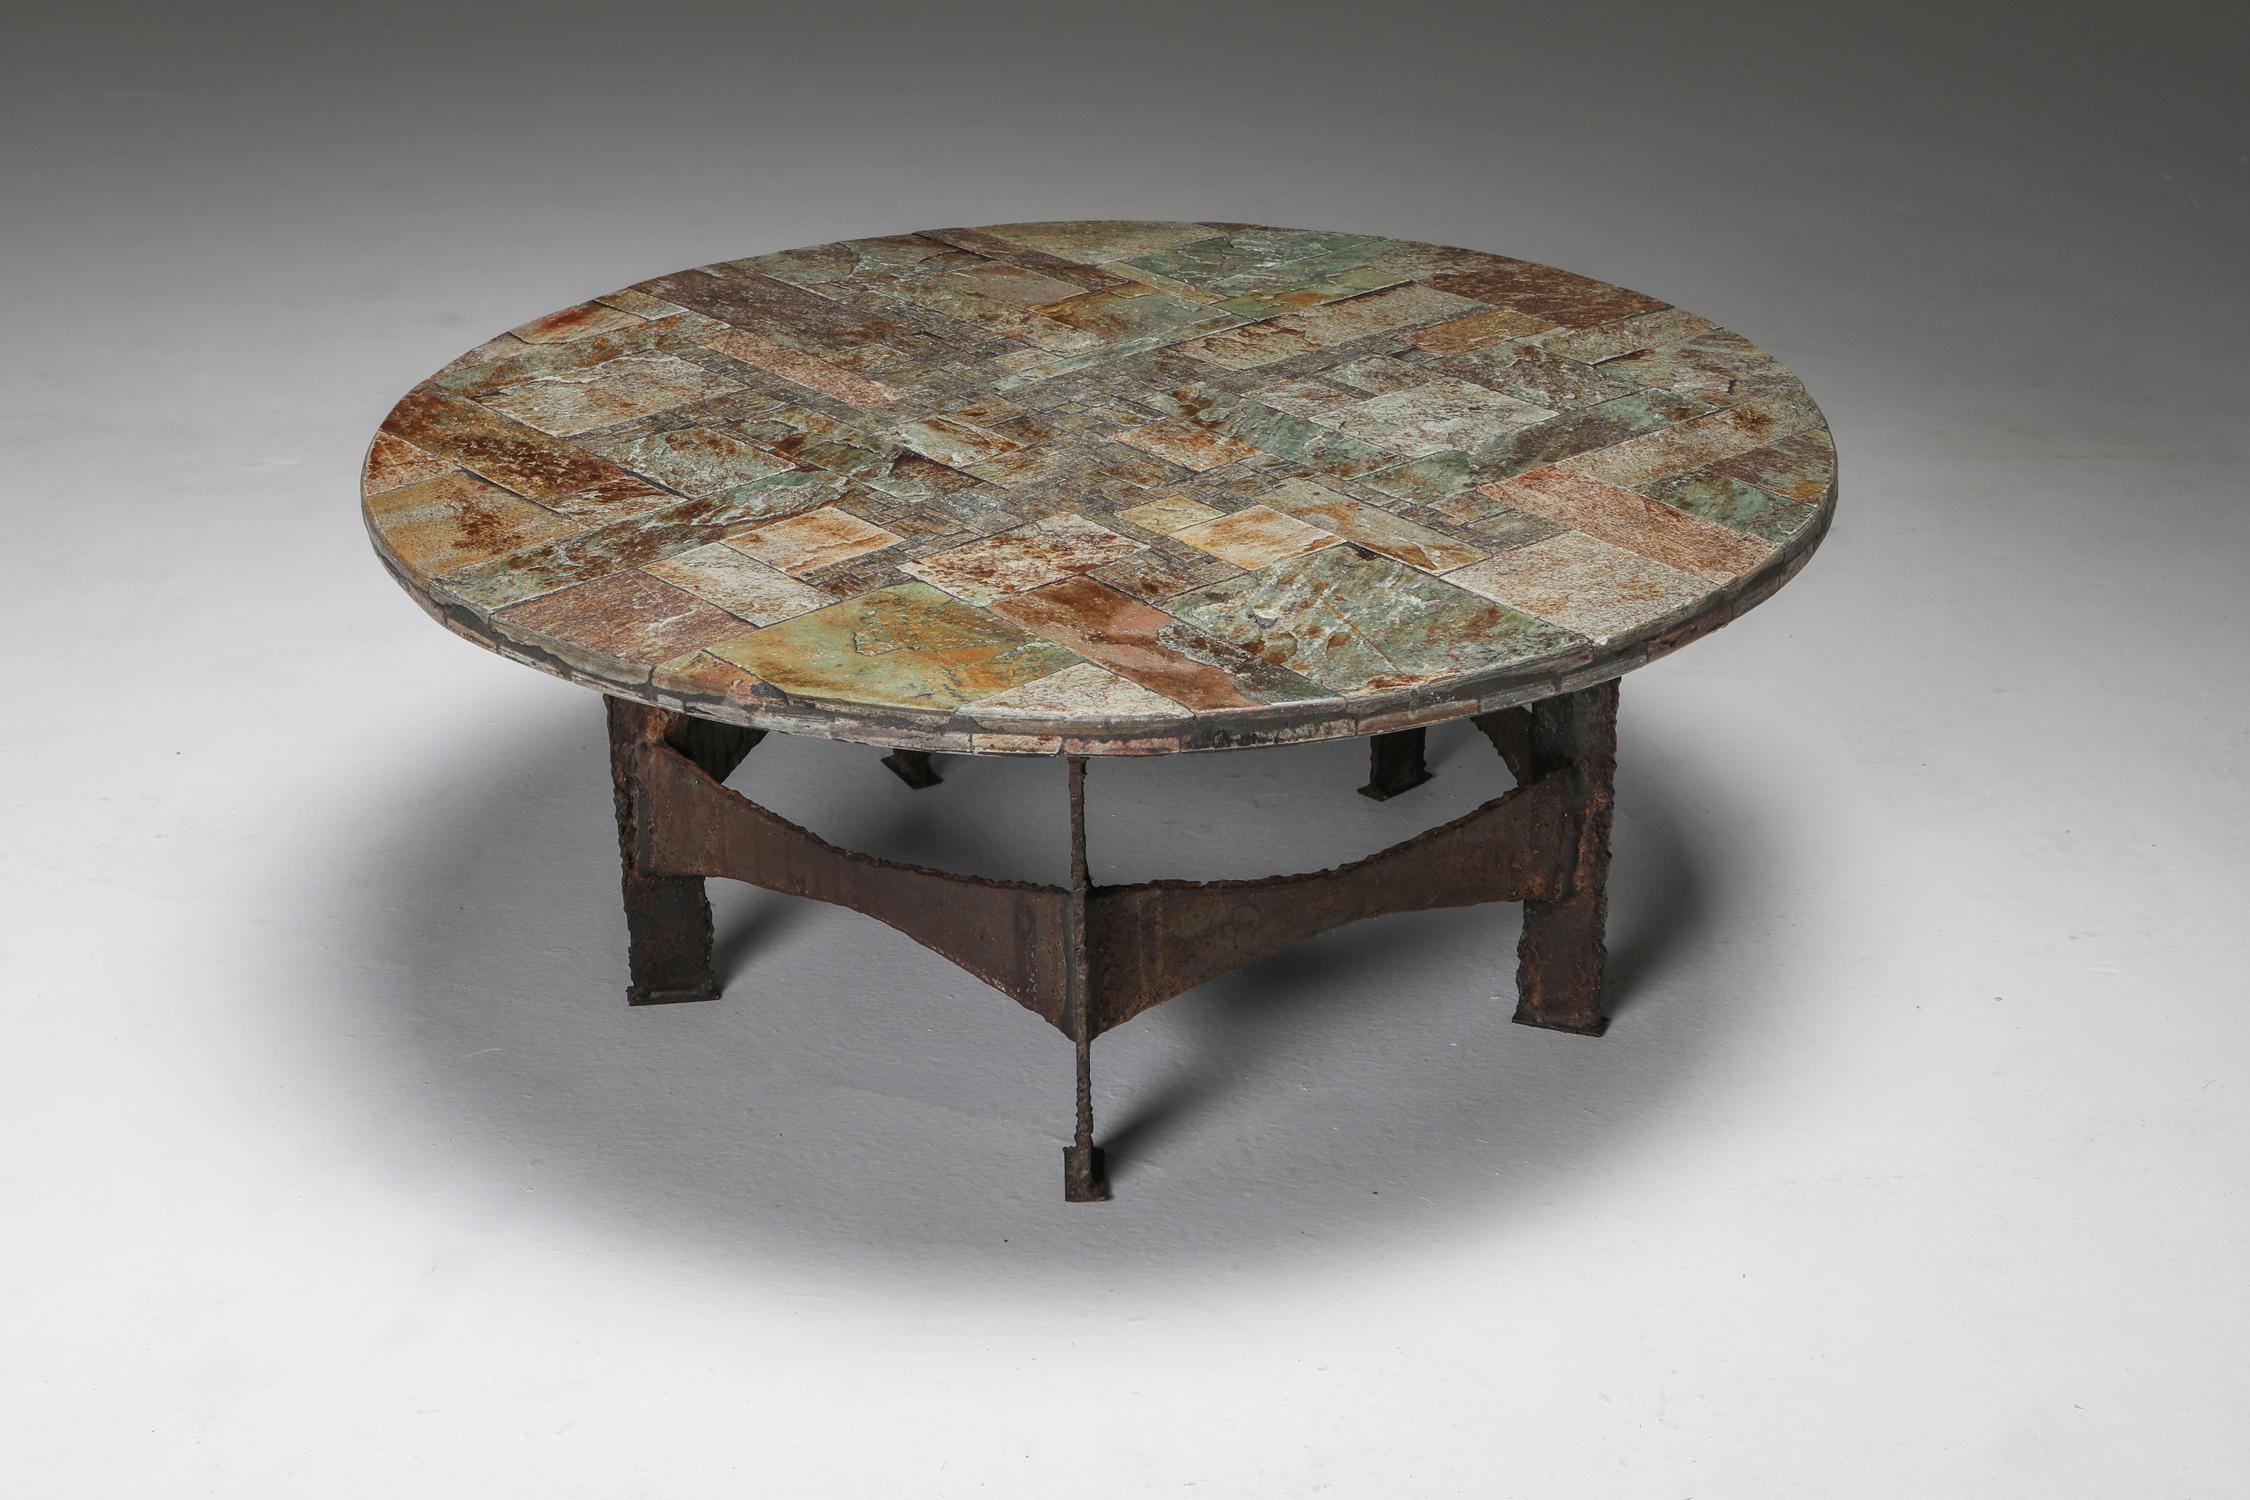 Pia Manu, coffee table, slate, iron, Belgium, 1970s.

Brutalist cocktail table by Pia Manu. The tabletop is a beautiful slate mosaic.
Displaying a variety of complementary natural colors, from pink to gold and green.

This piece has a very wabi